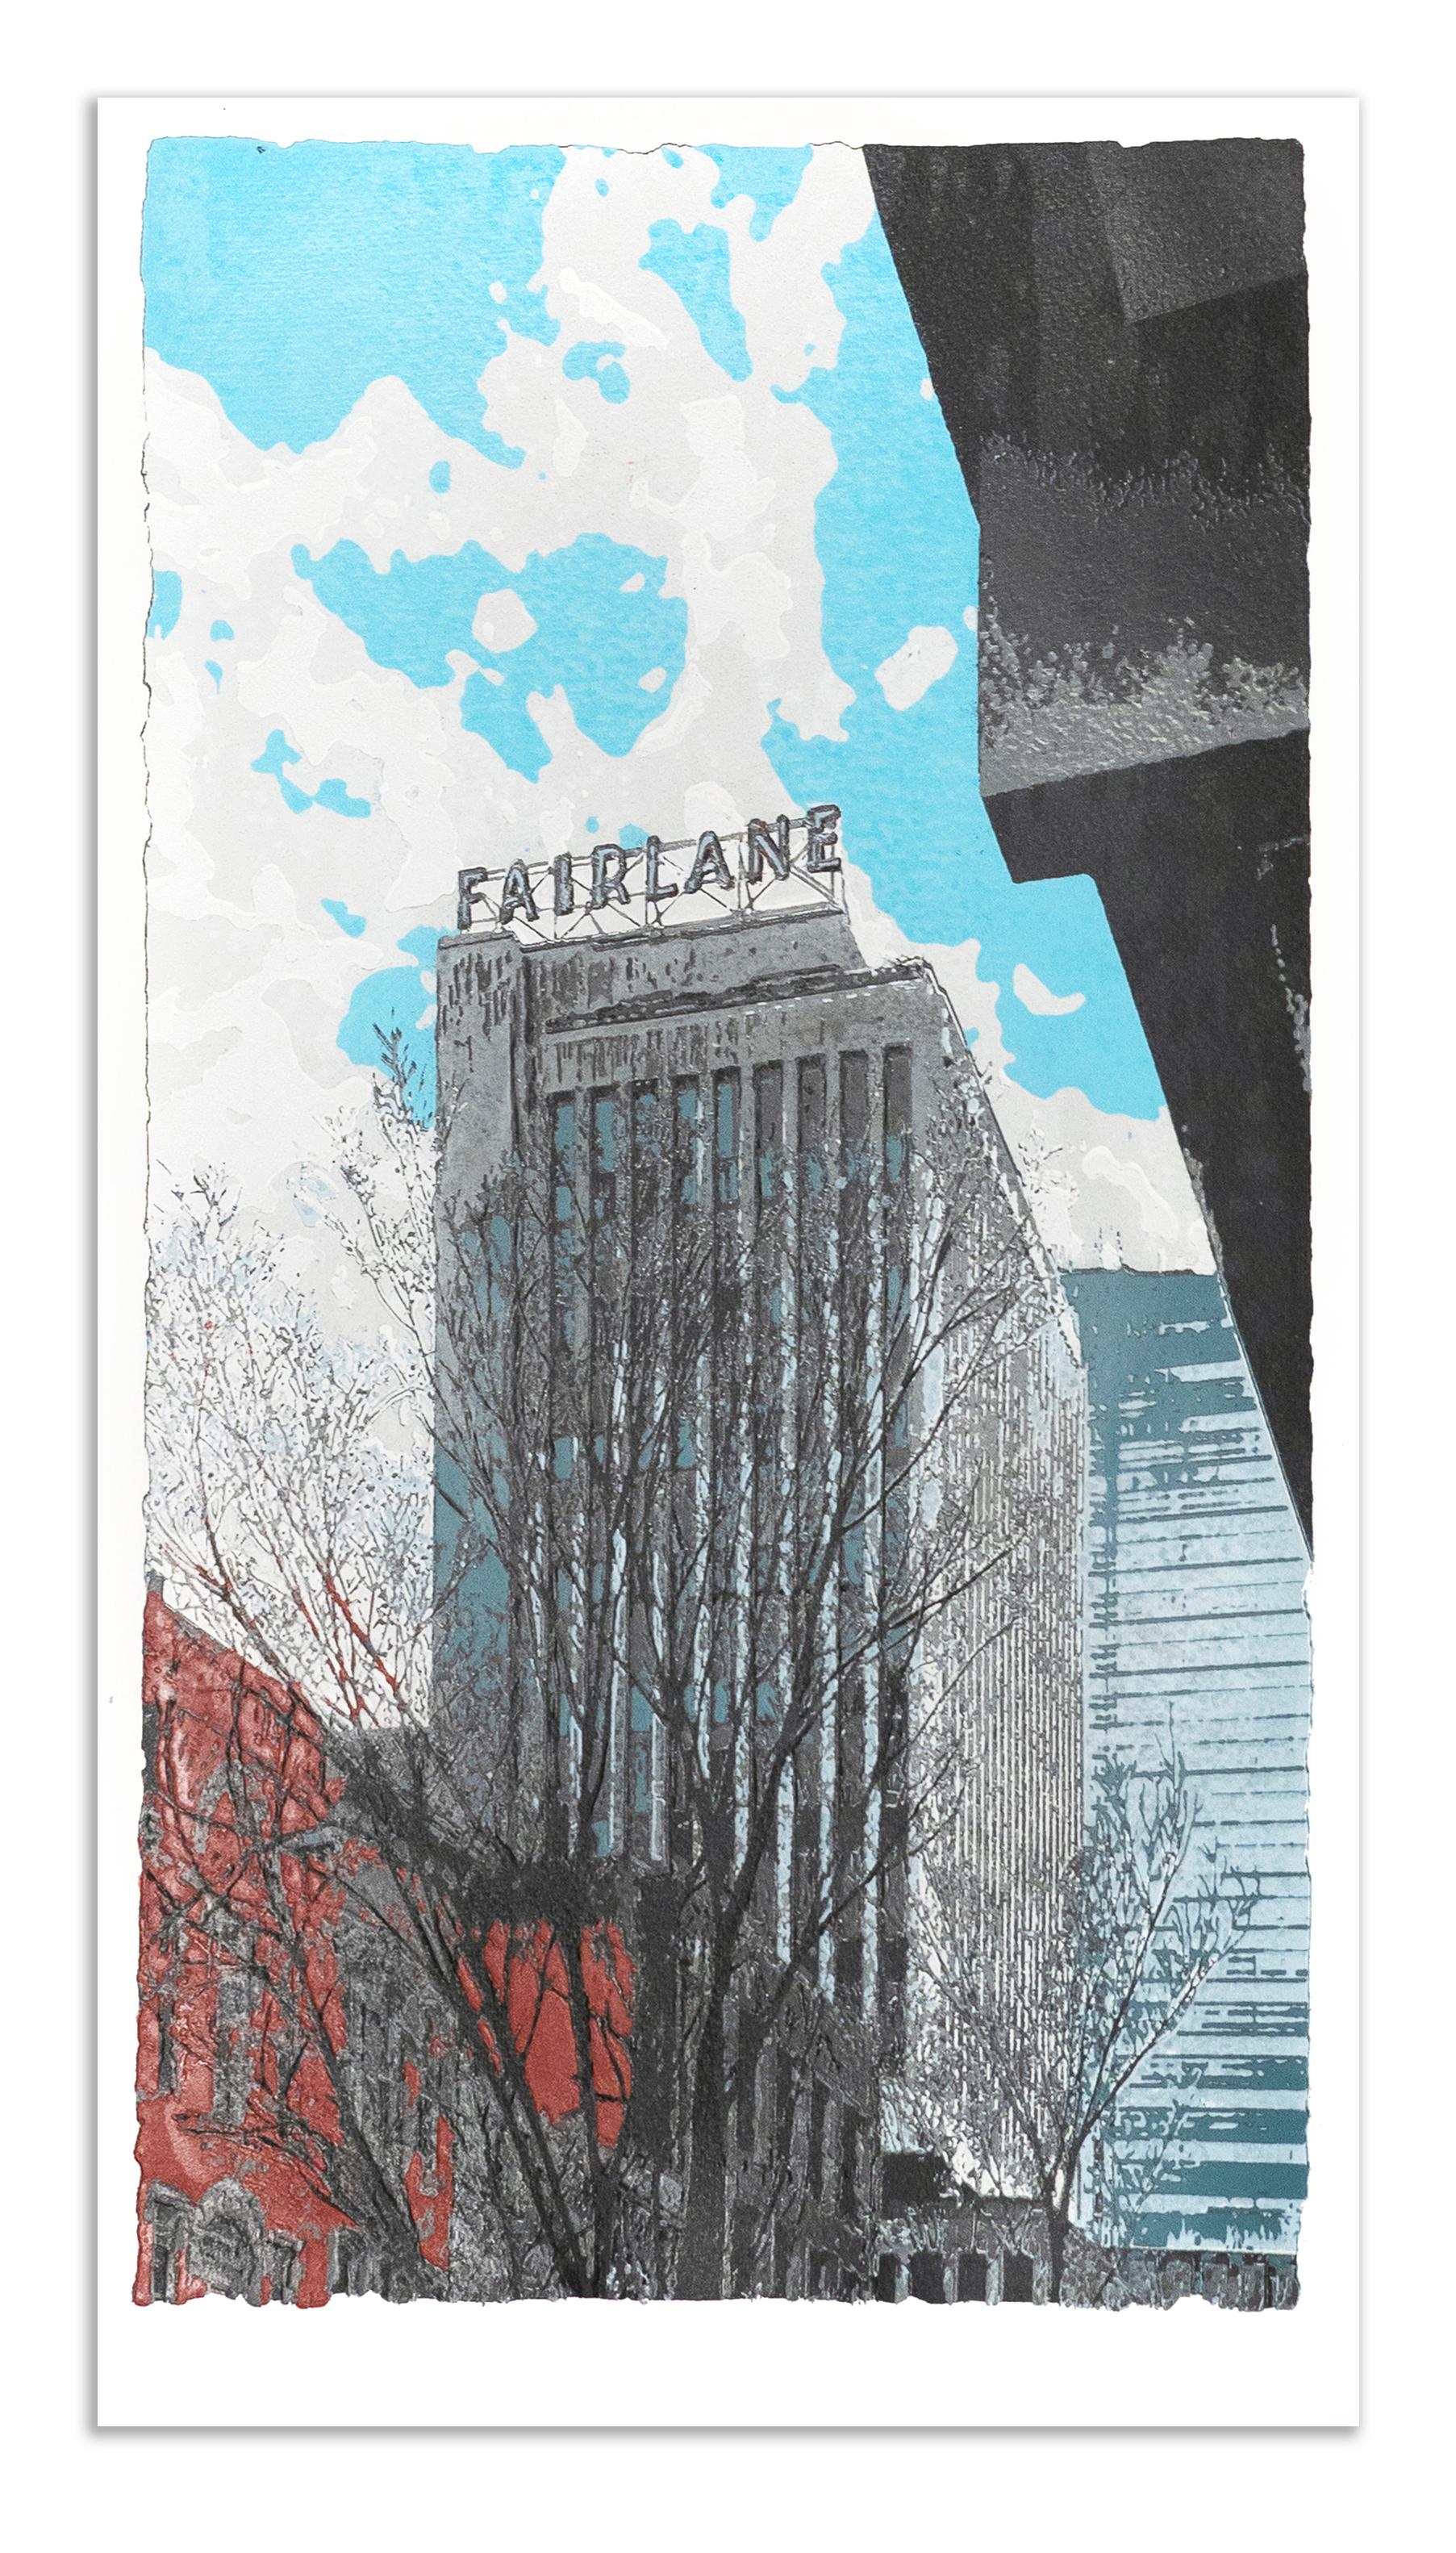 The Fairlane Hotel (1/5) - Print by Terrell Thornhill 